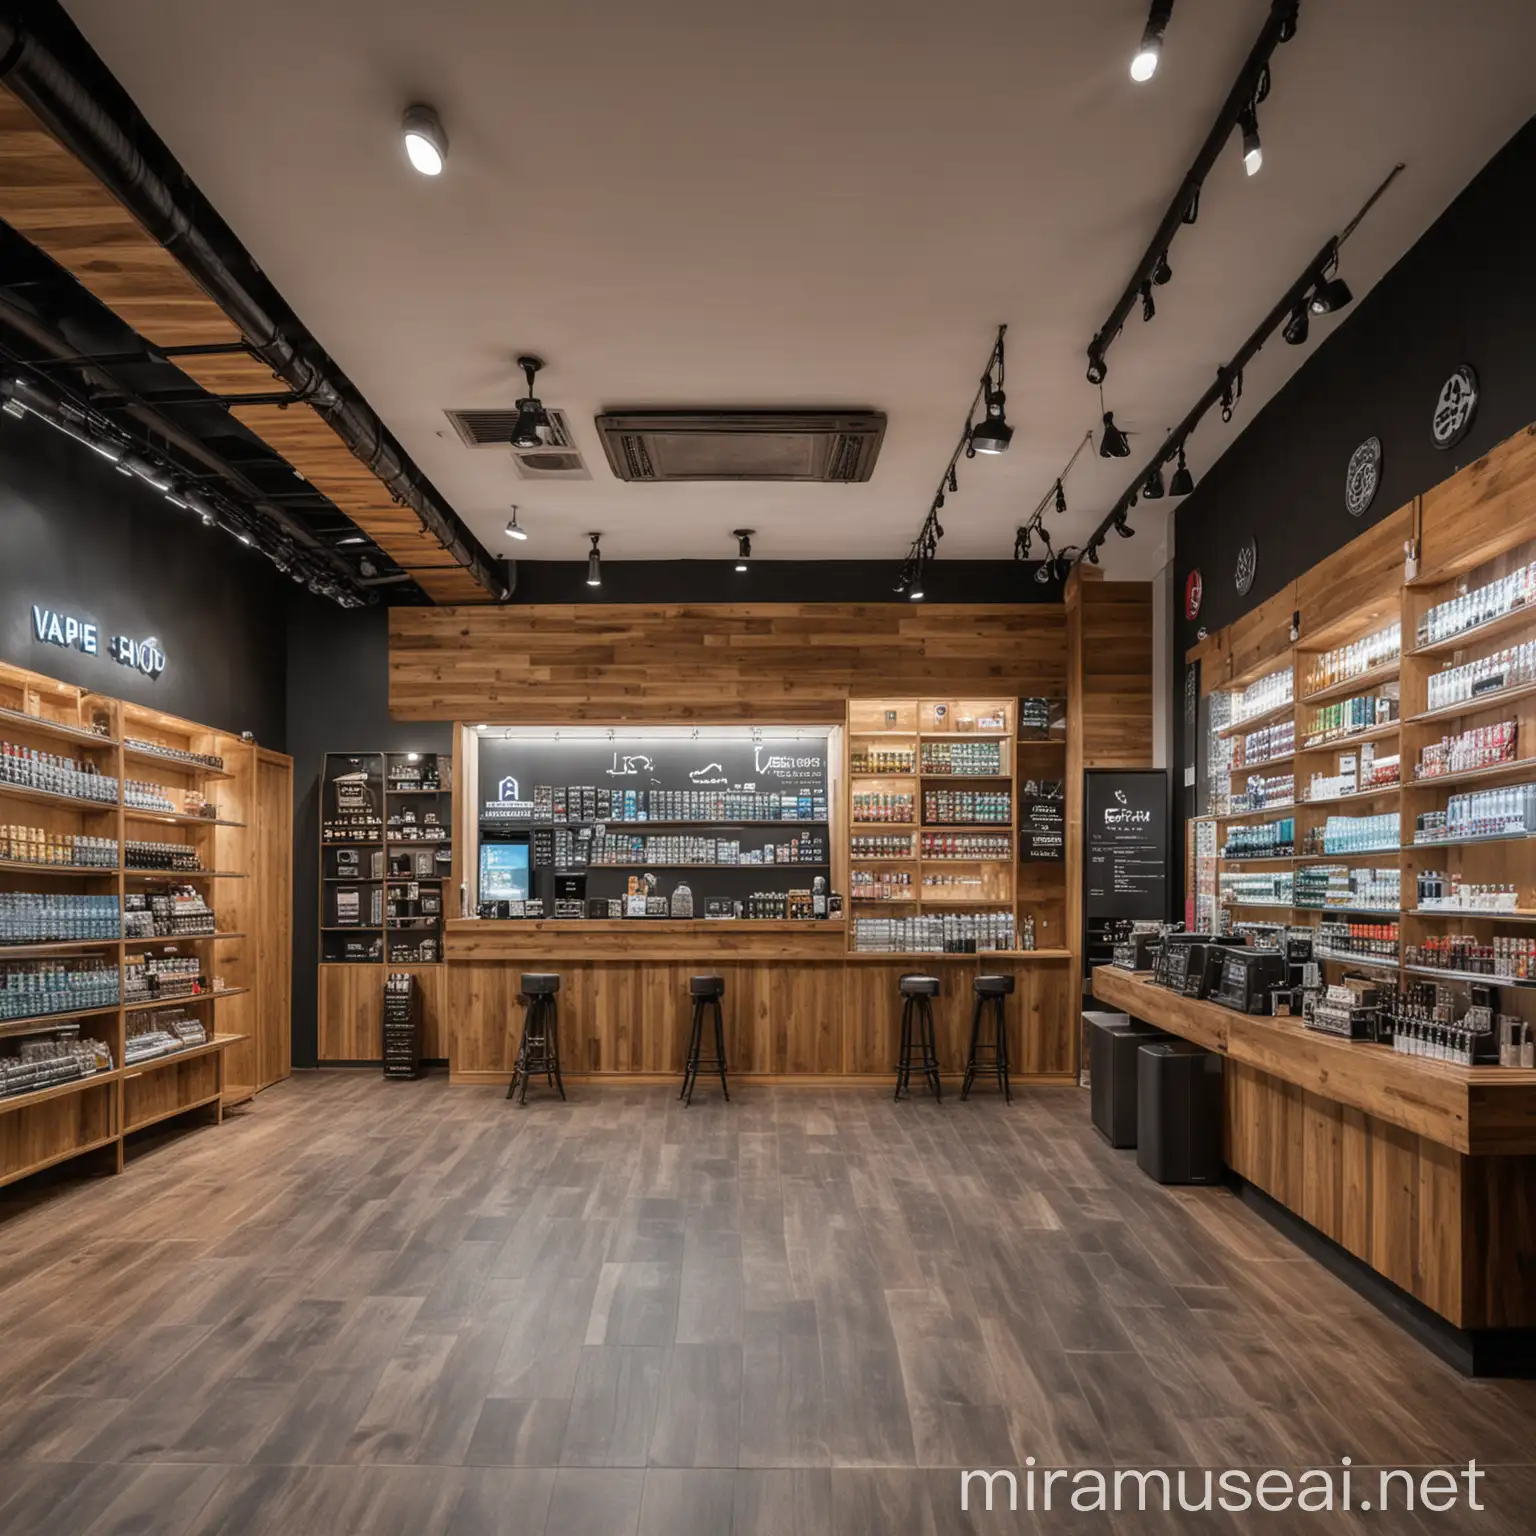 Modern Interior of Vape Shop in Eastern Asian Countries with Reception Area